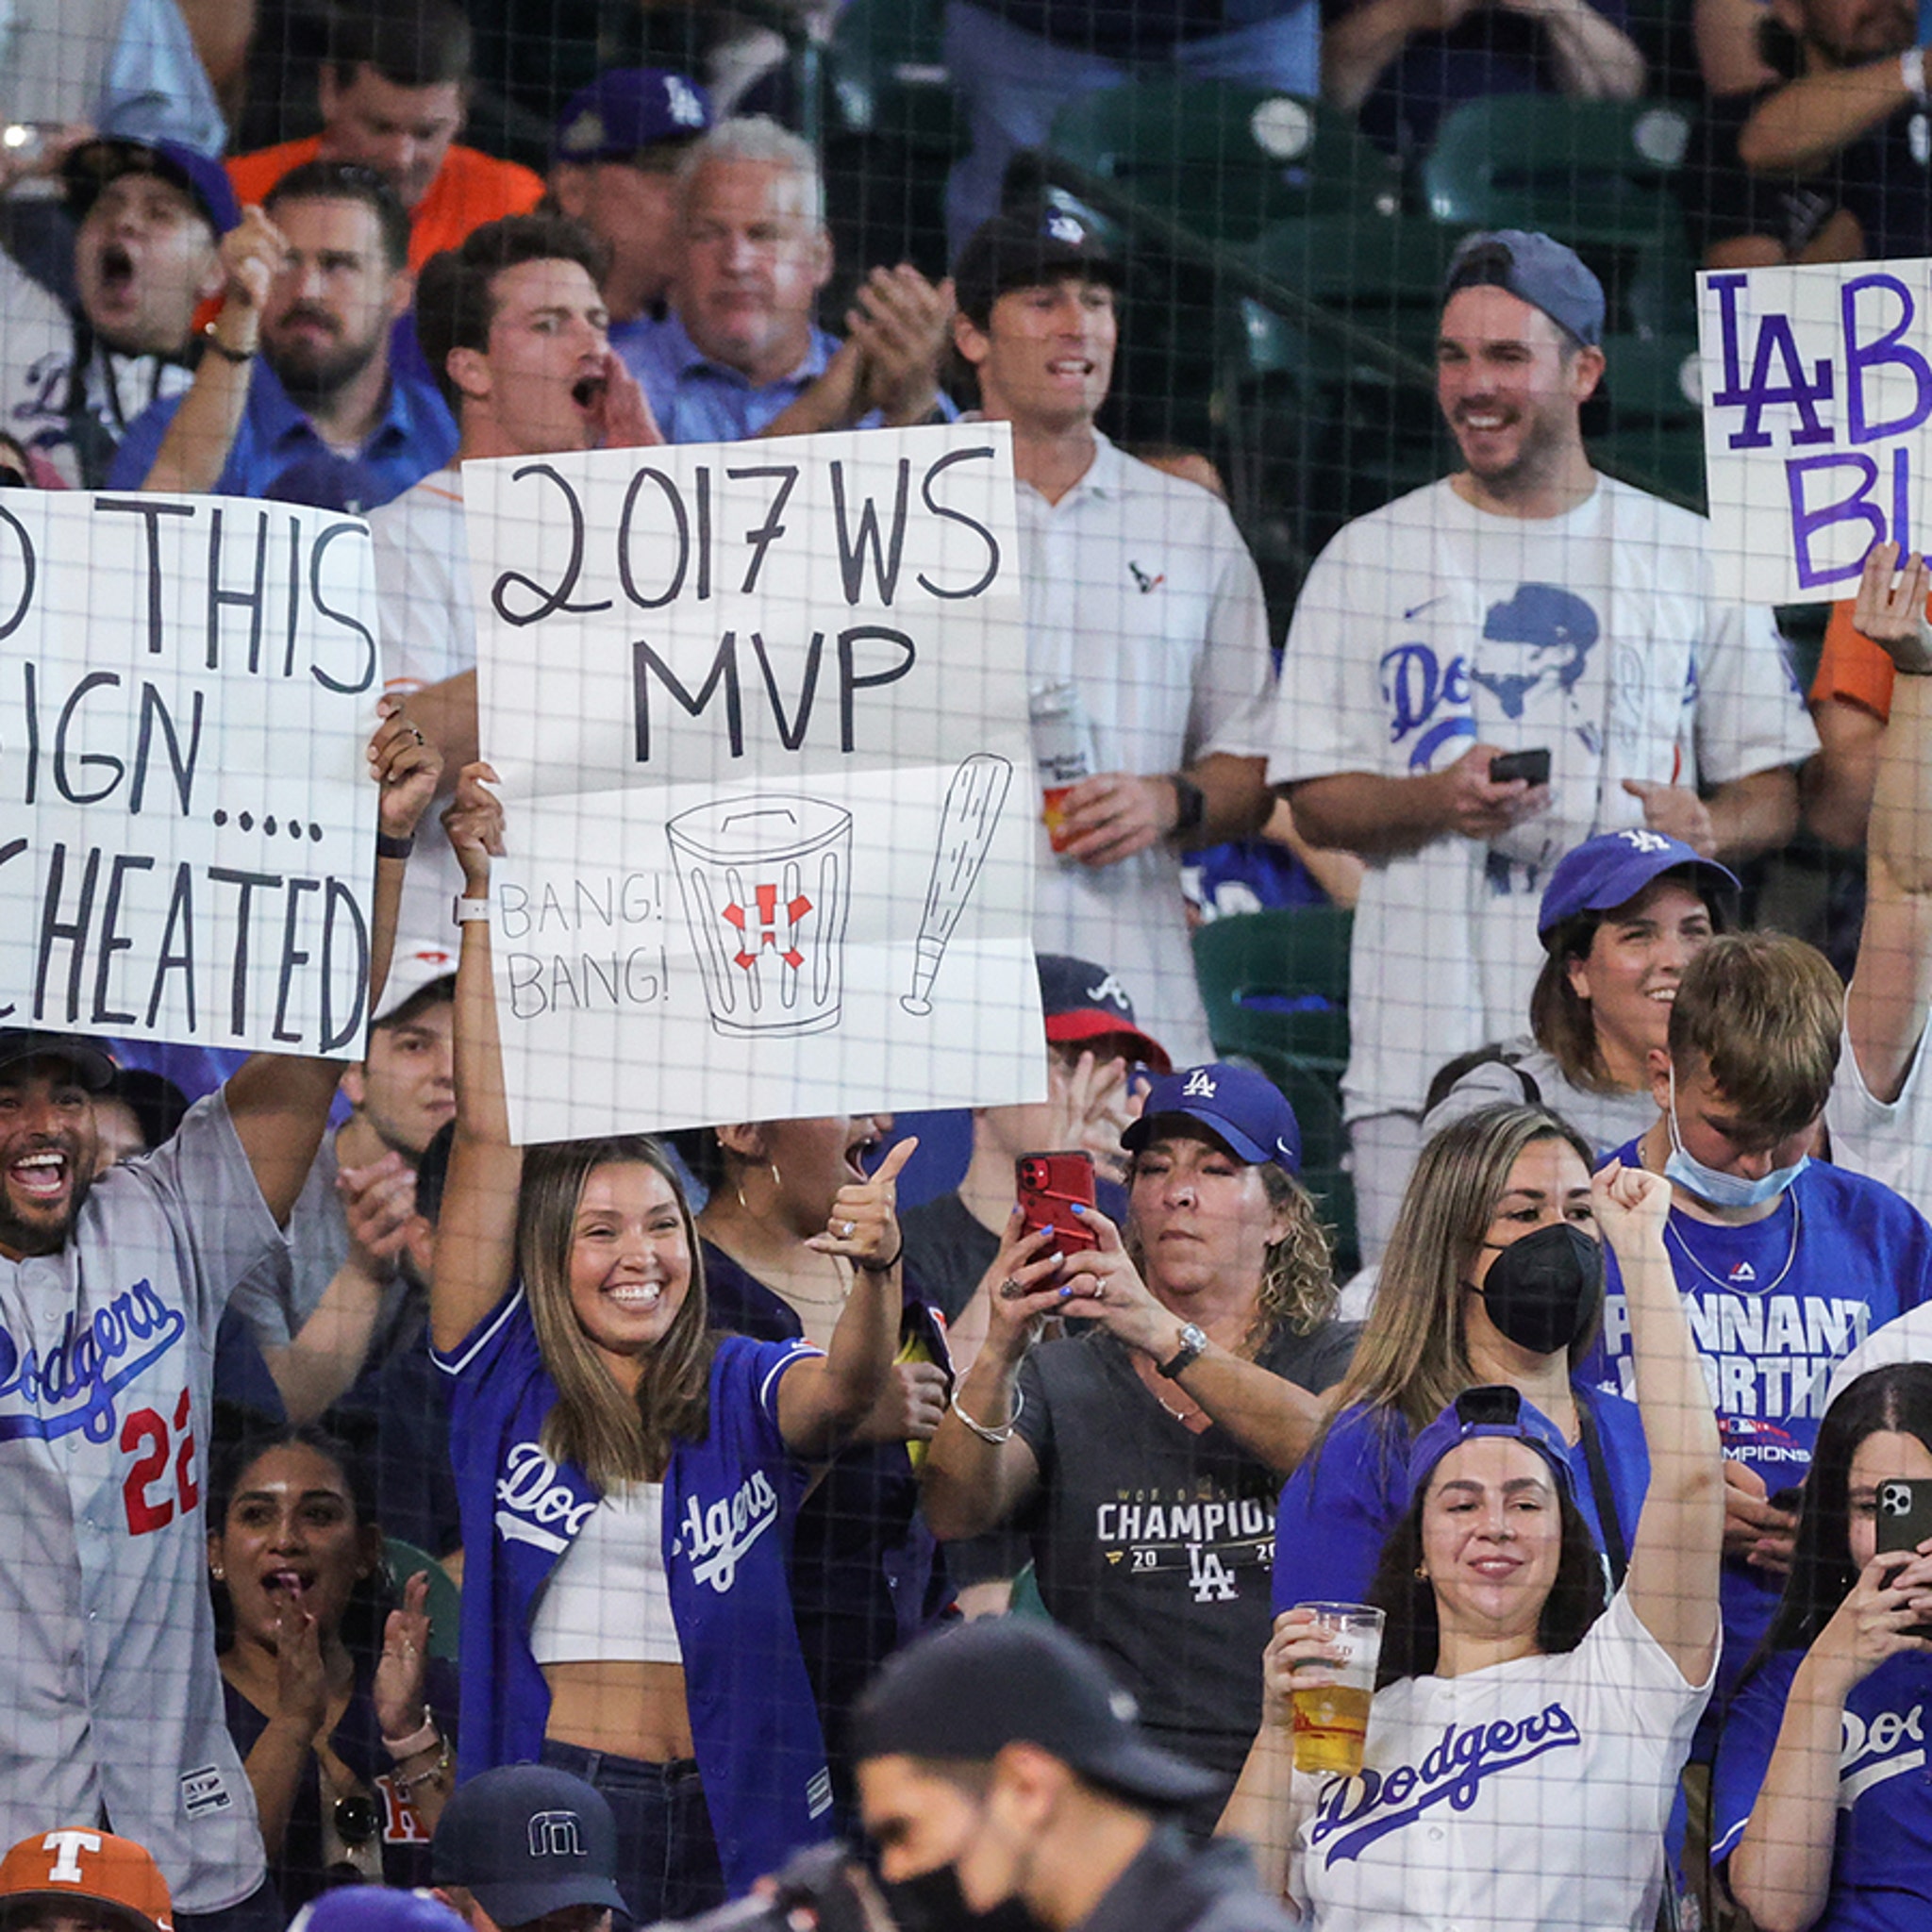 Dodgers Fans Invade Houston, Incessantly Troll Astros W/ 'Cheaters